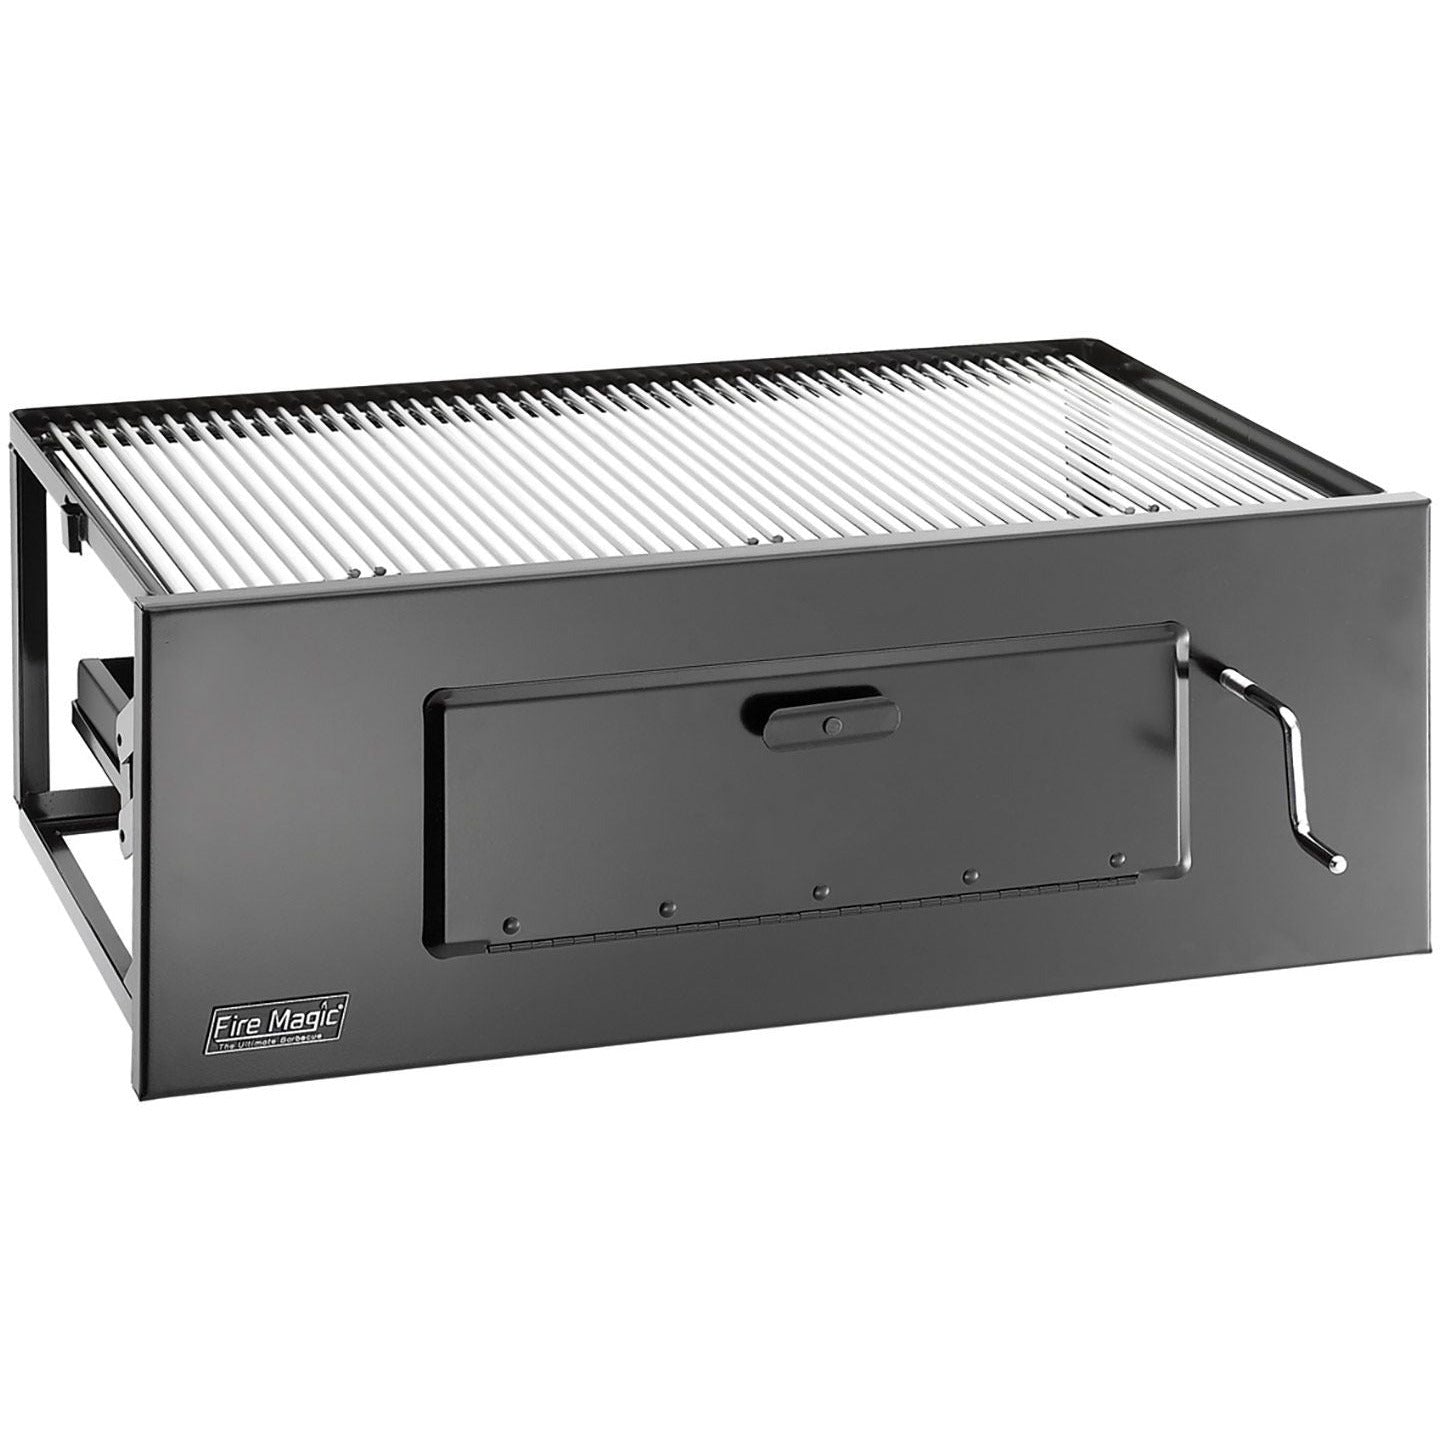 Fire Magic Lift-A-Fire 24" Built-In Charcoal Grill 3339